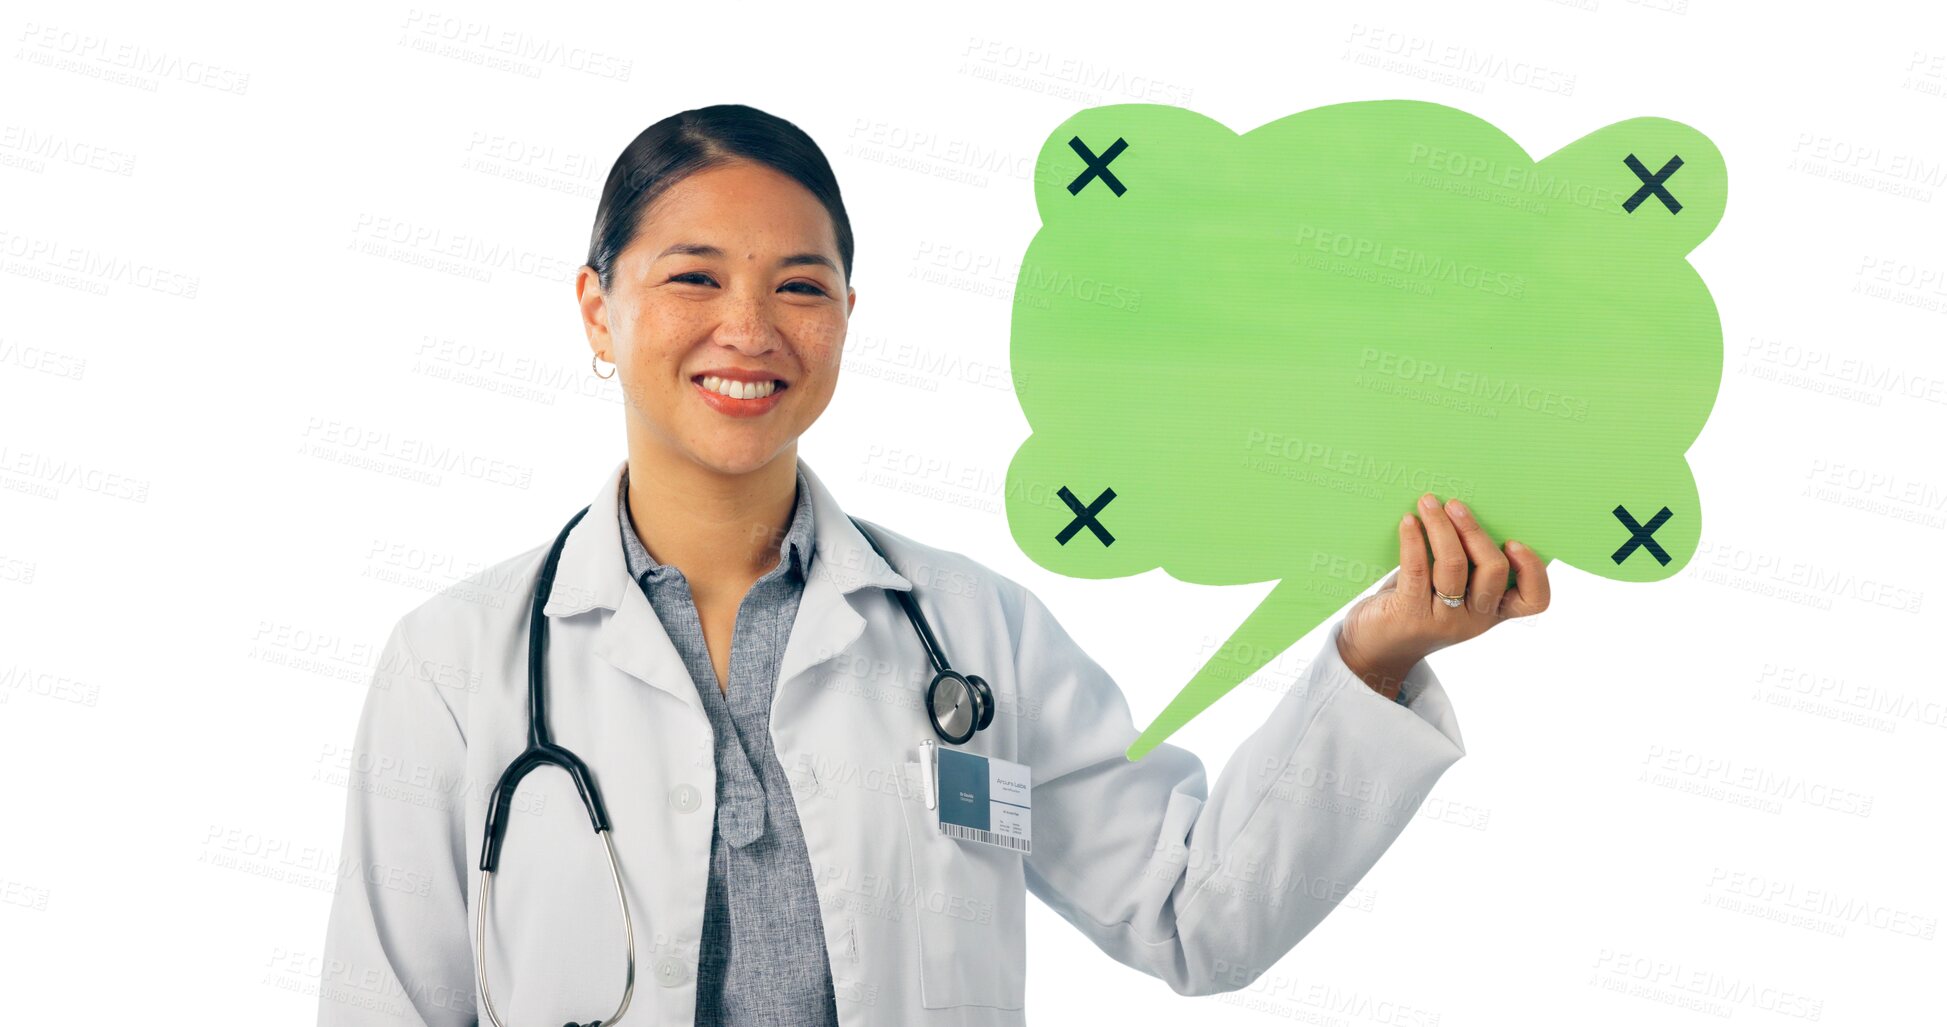 Buy stock photo Doctor, smile and speech bubble for healthcare advice, medical FAQ or public service announcement. Portrait, female physician and text balloon for communication on isolated transparent png background